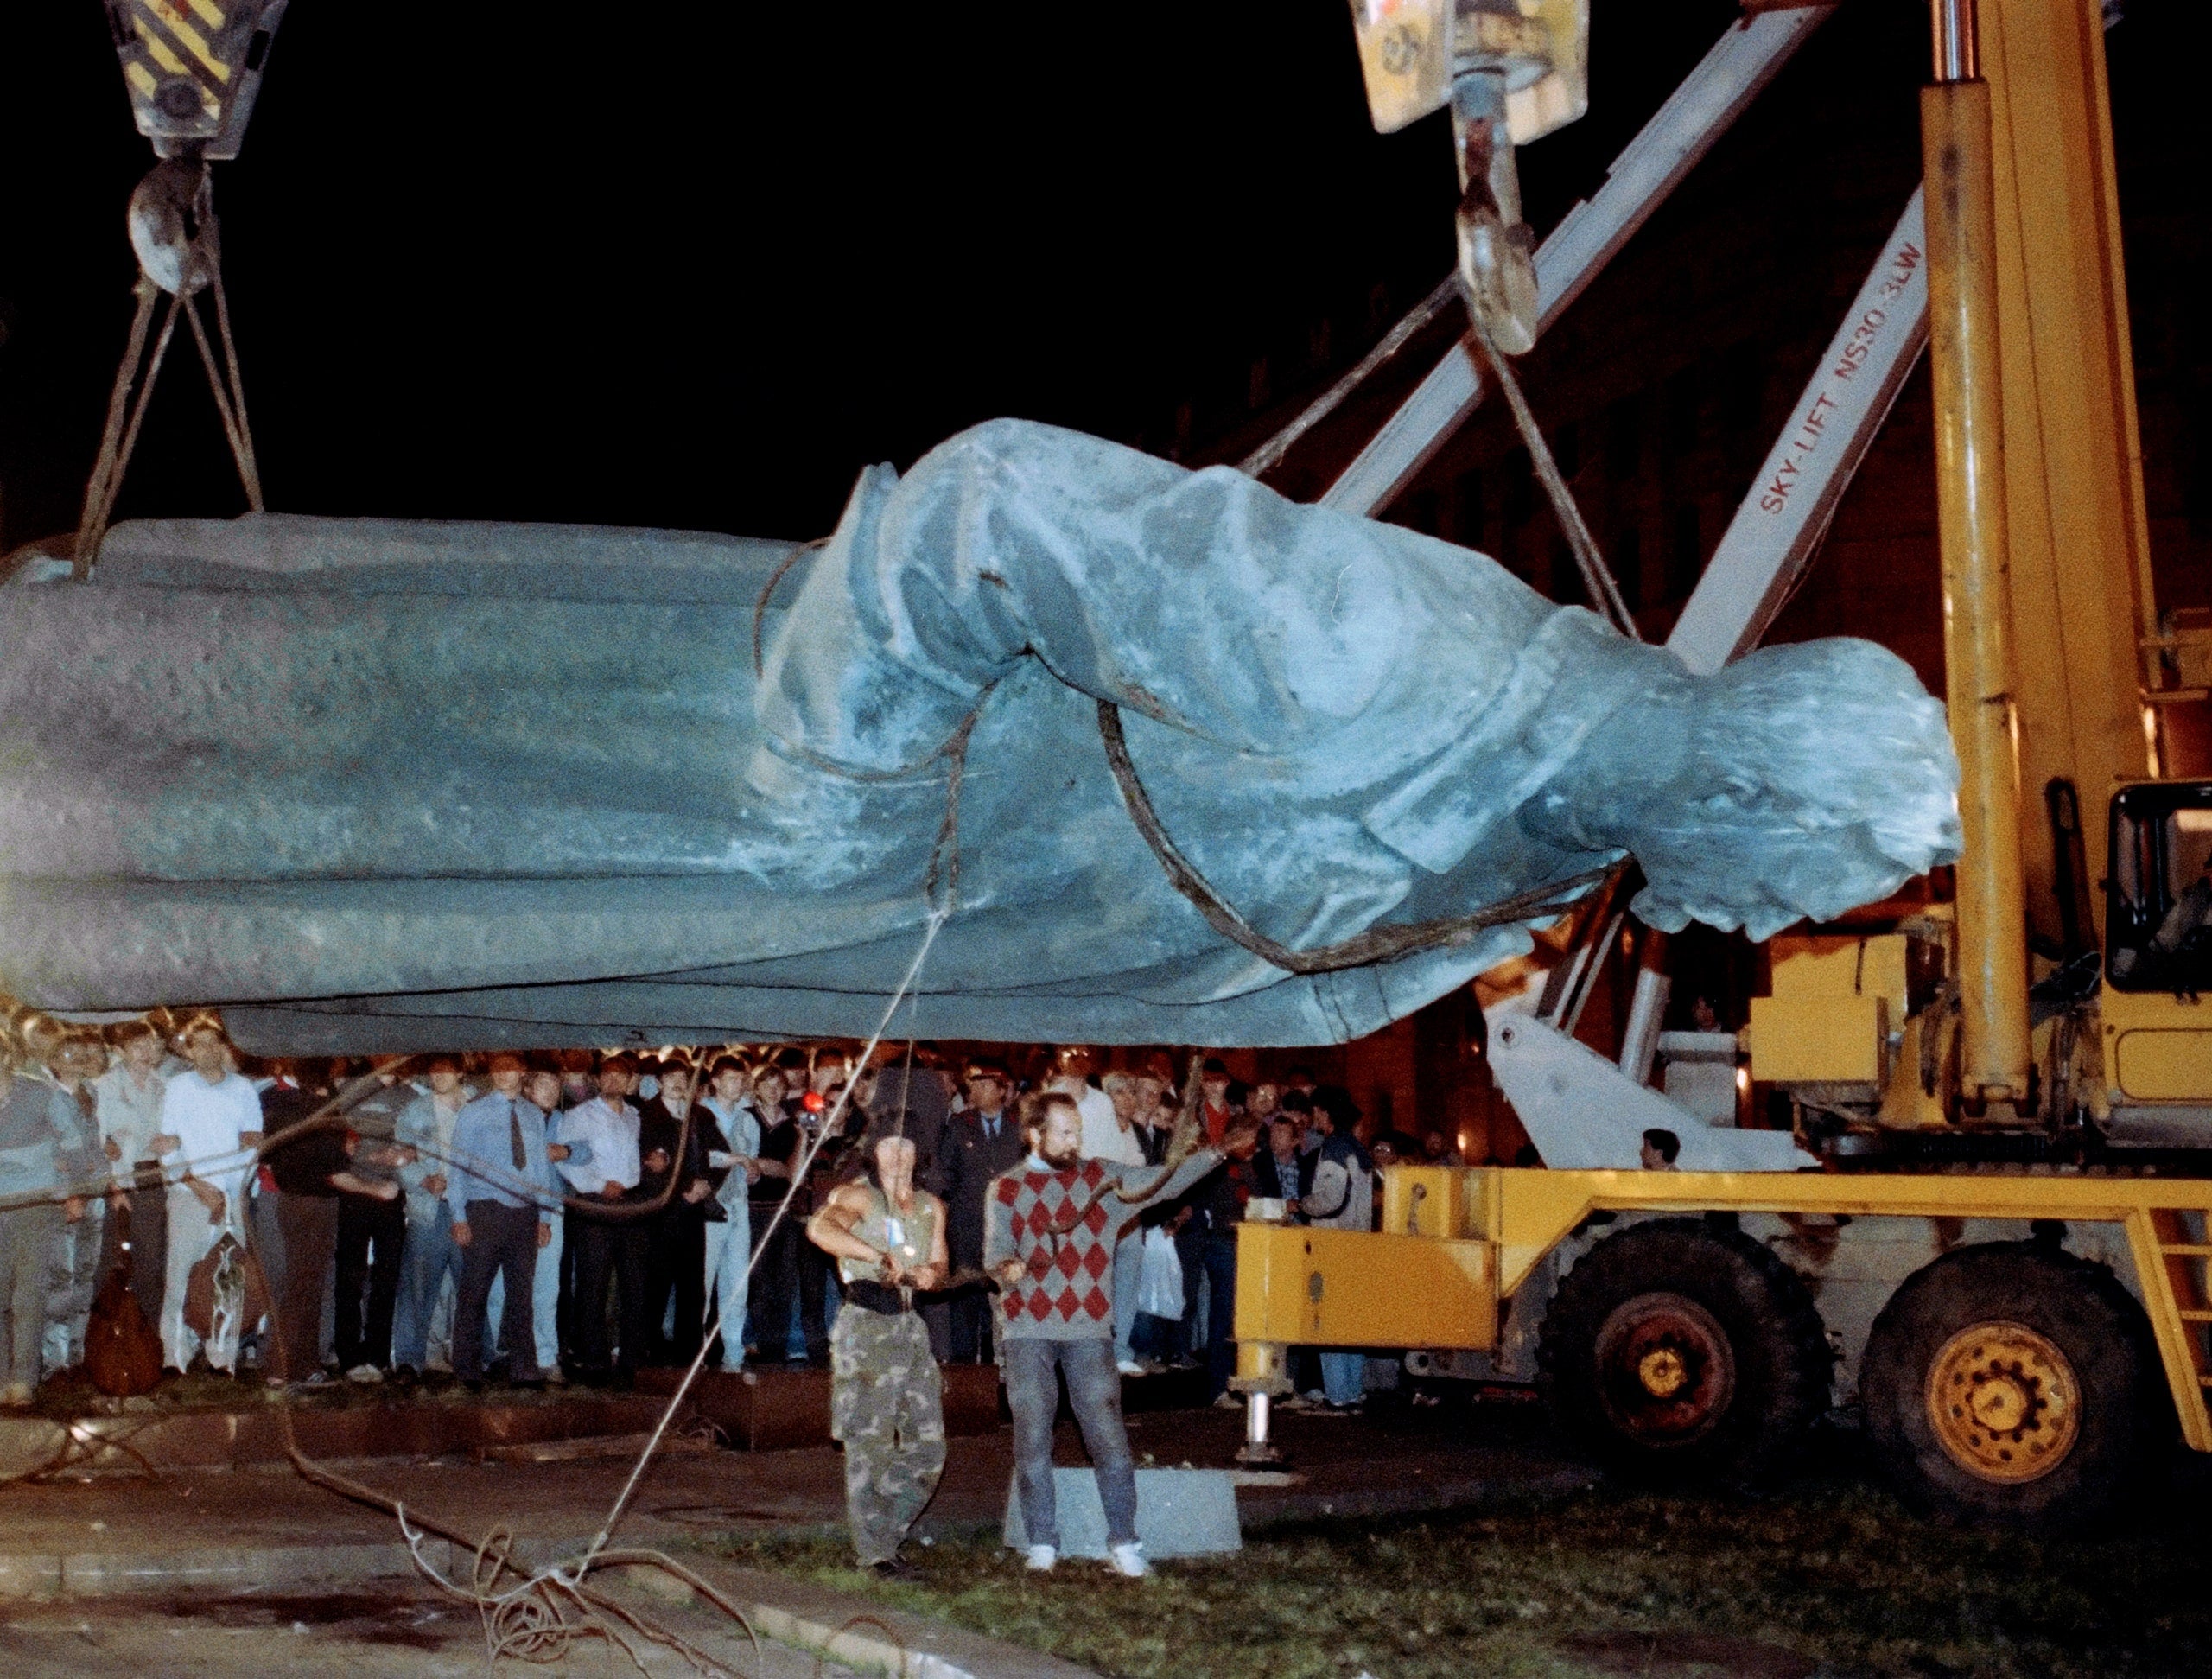 The statue of Dzerzhinsky being removed in 1991